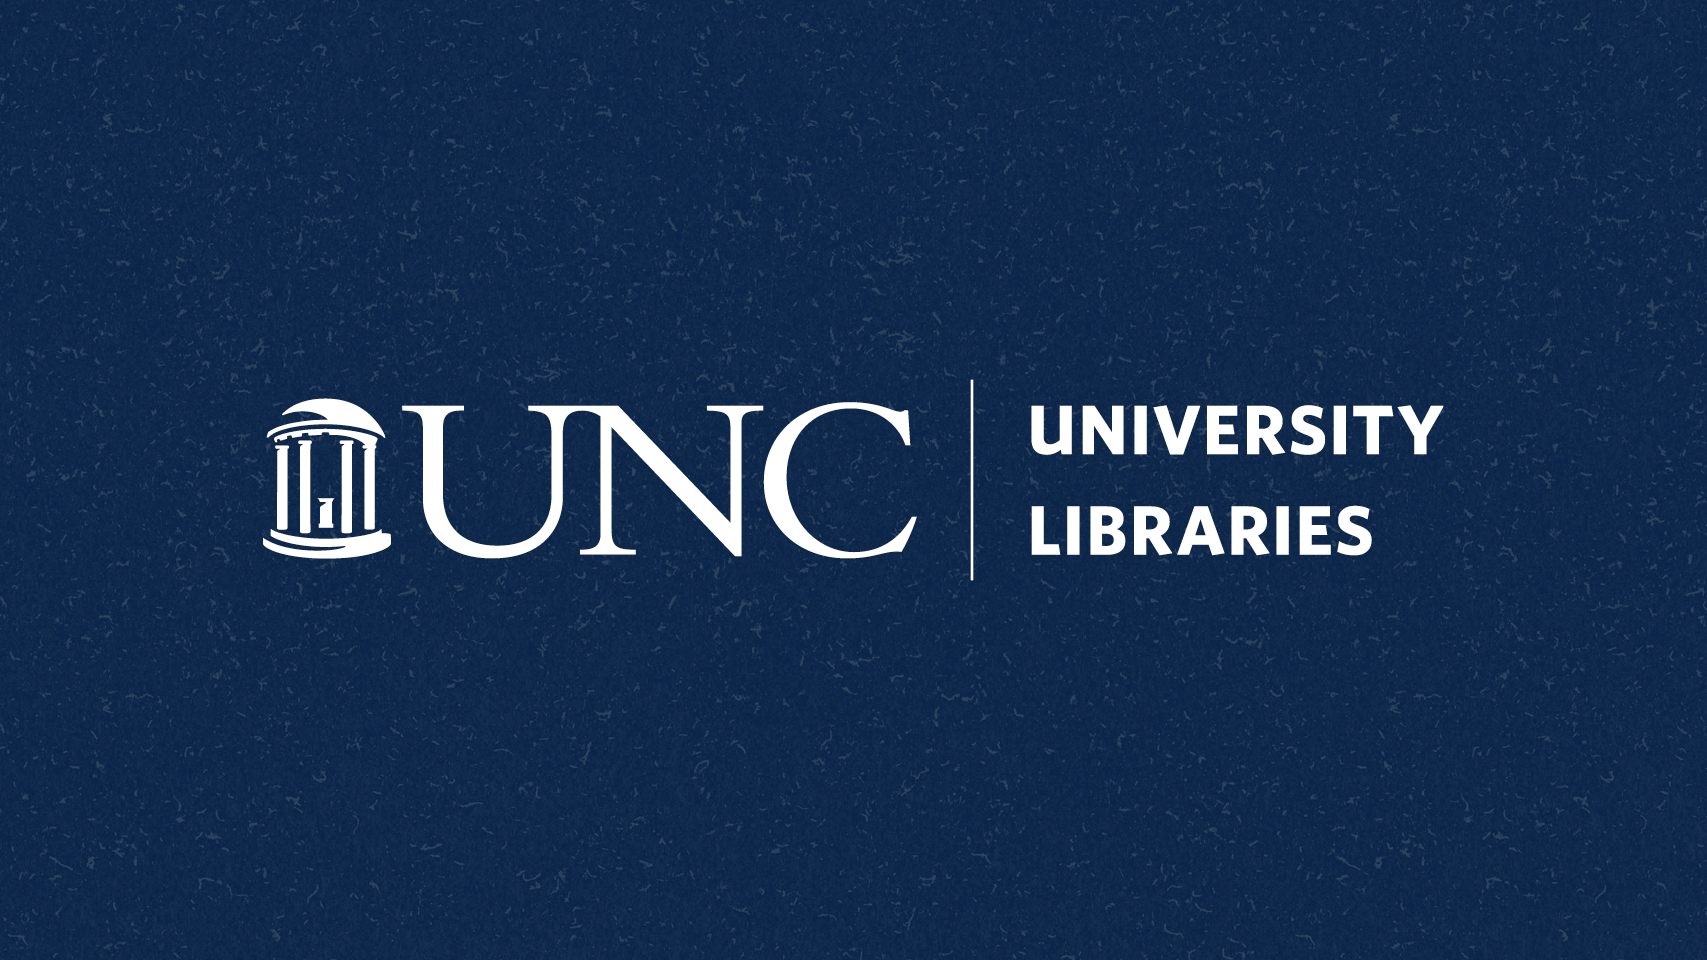 A message from interim University librarian María R. Estorino about the library budget